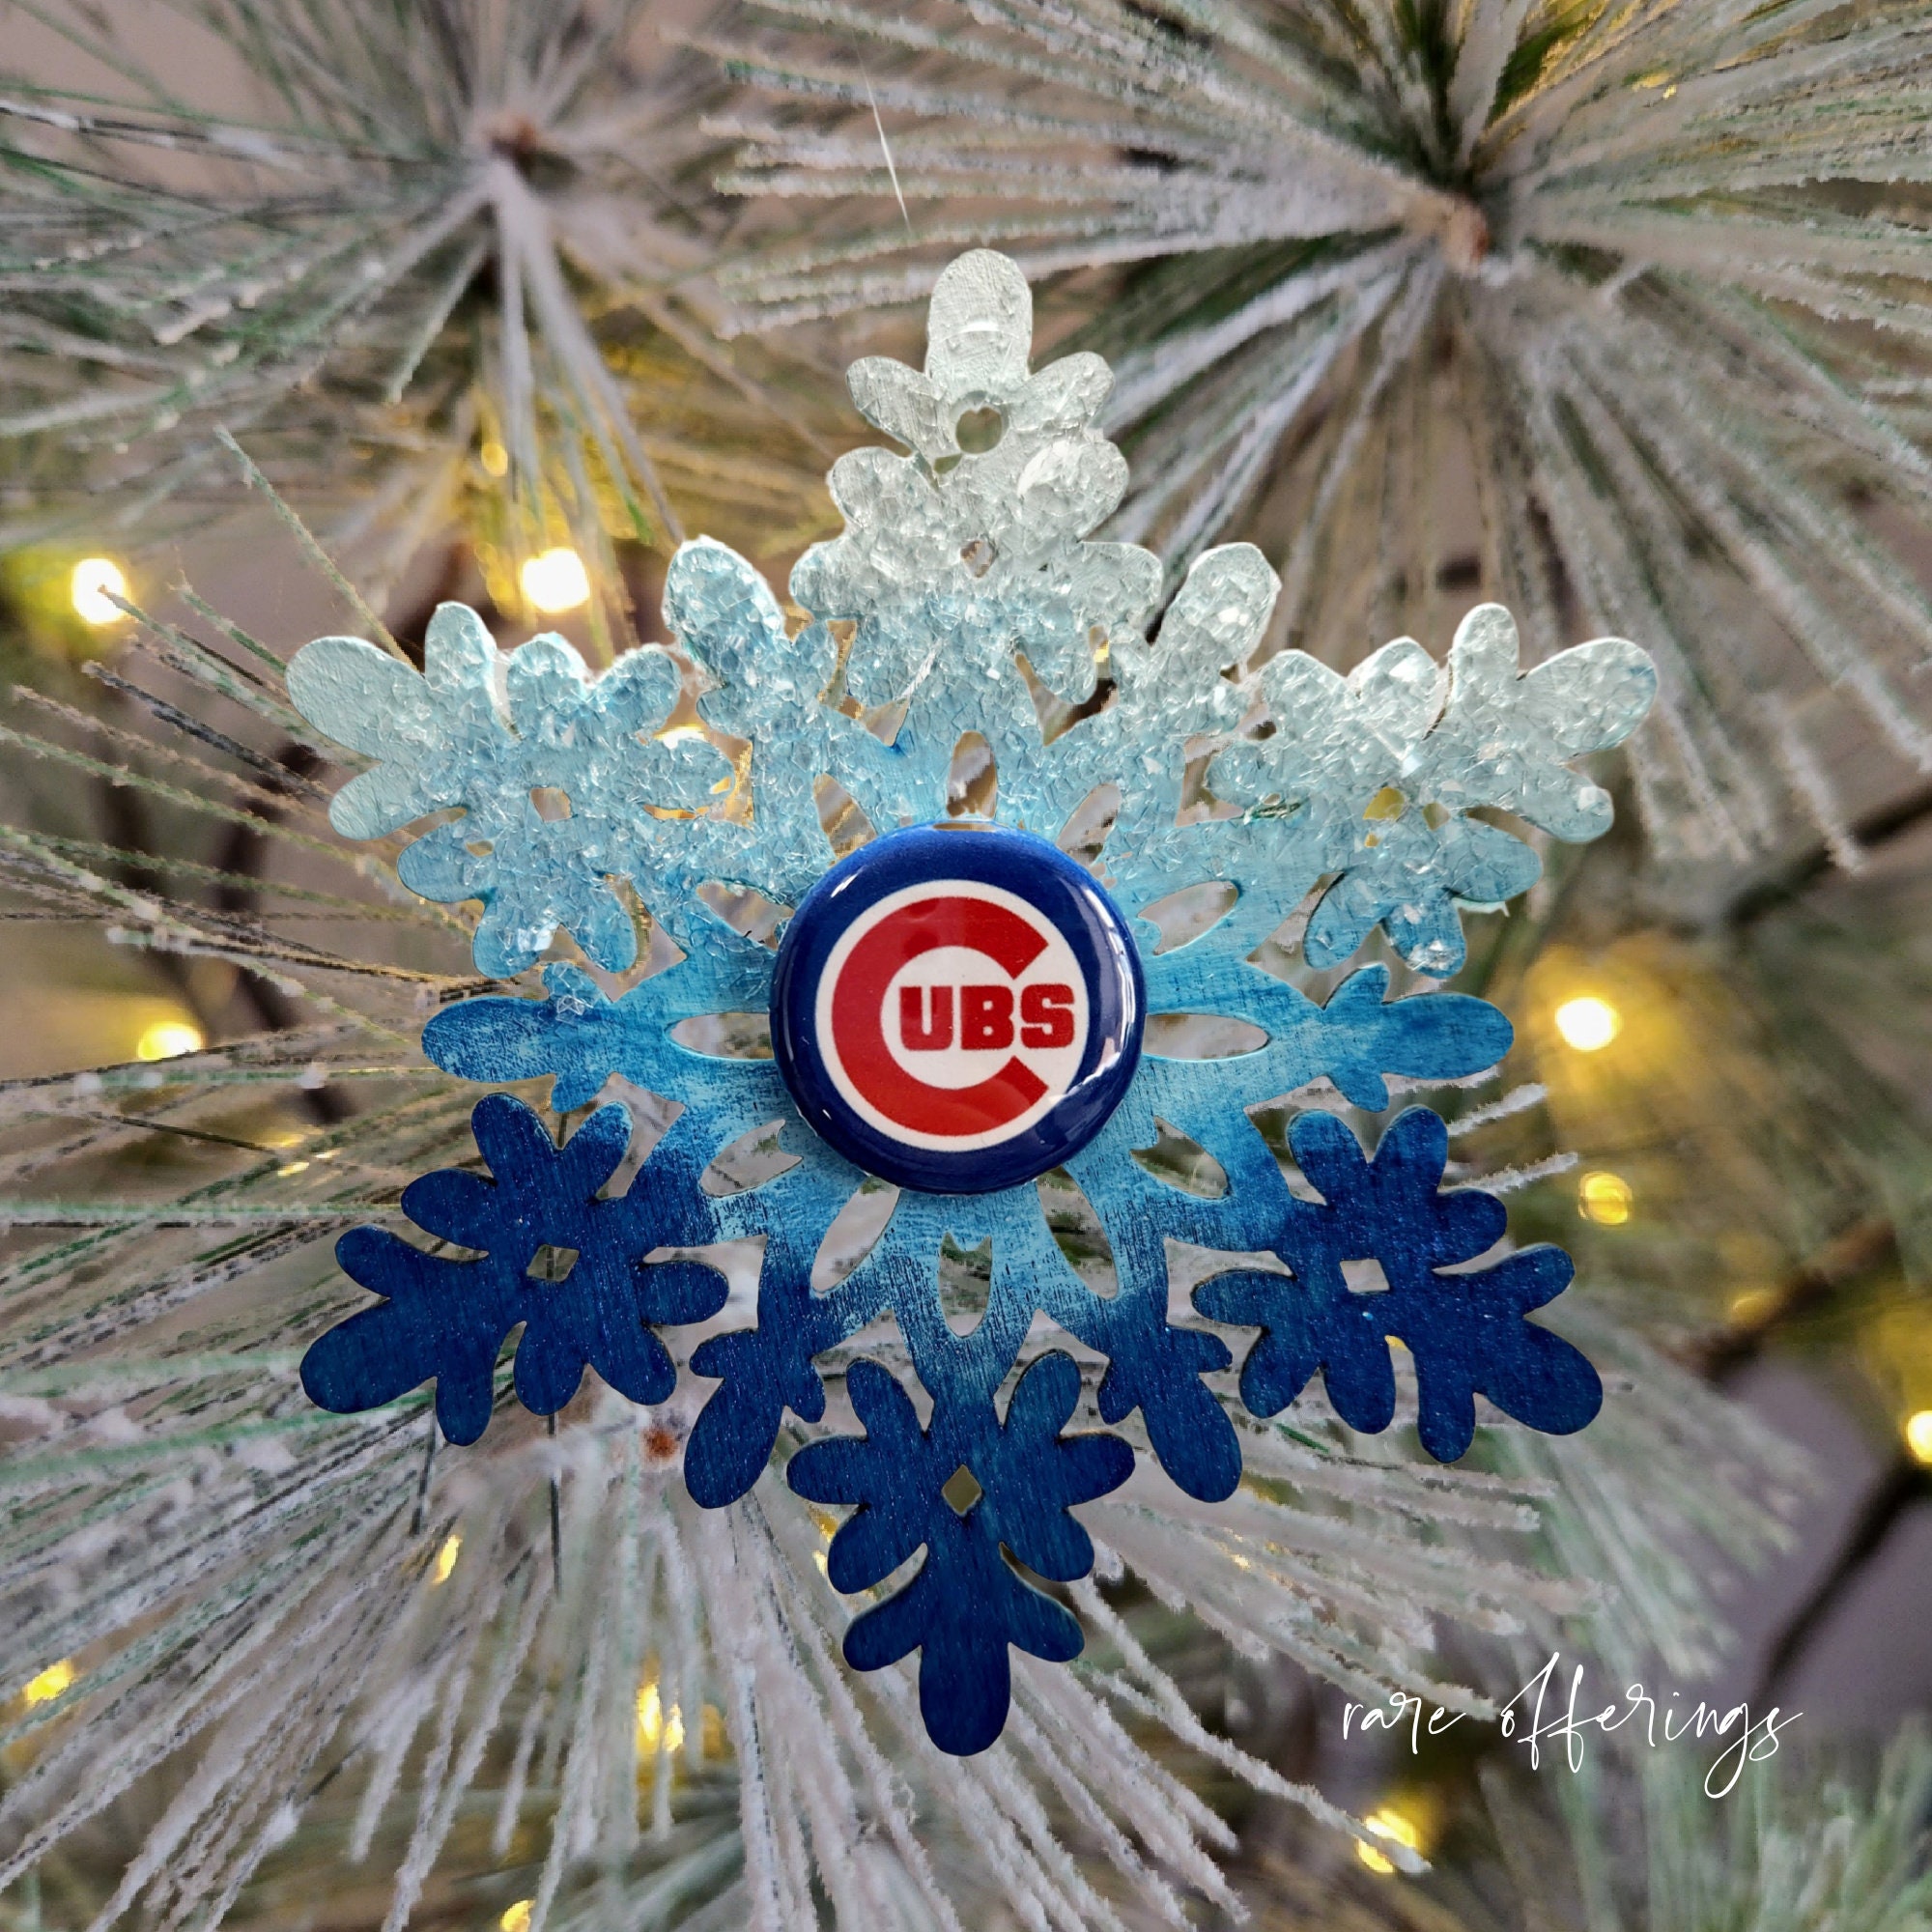 CHICAGO CUBS CERAMIC JERSEY ORNAMENT New in Plastic Casing Color Me  w/markers